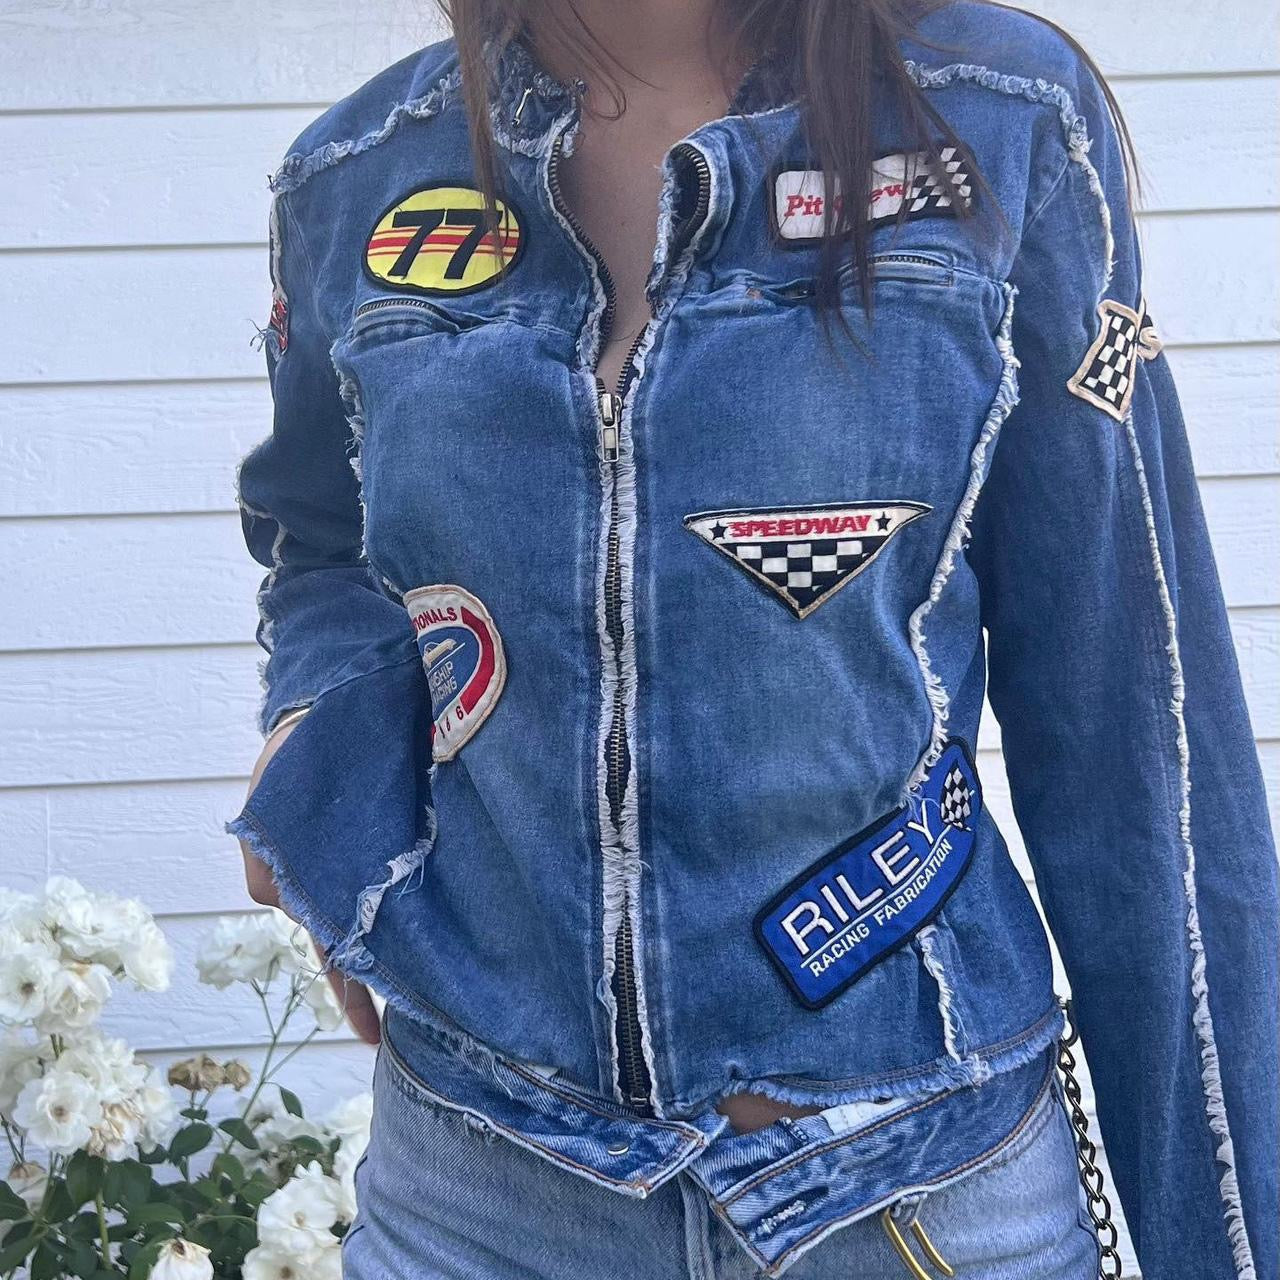 Vintage 90s denim jacket with racing pactches 🌸